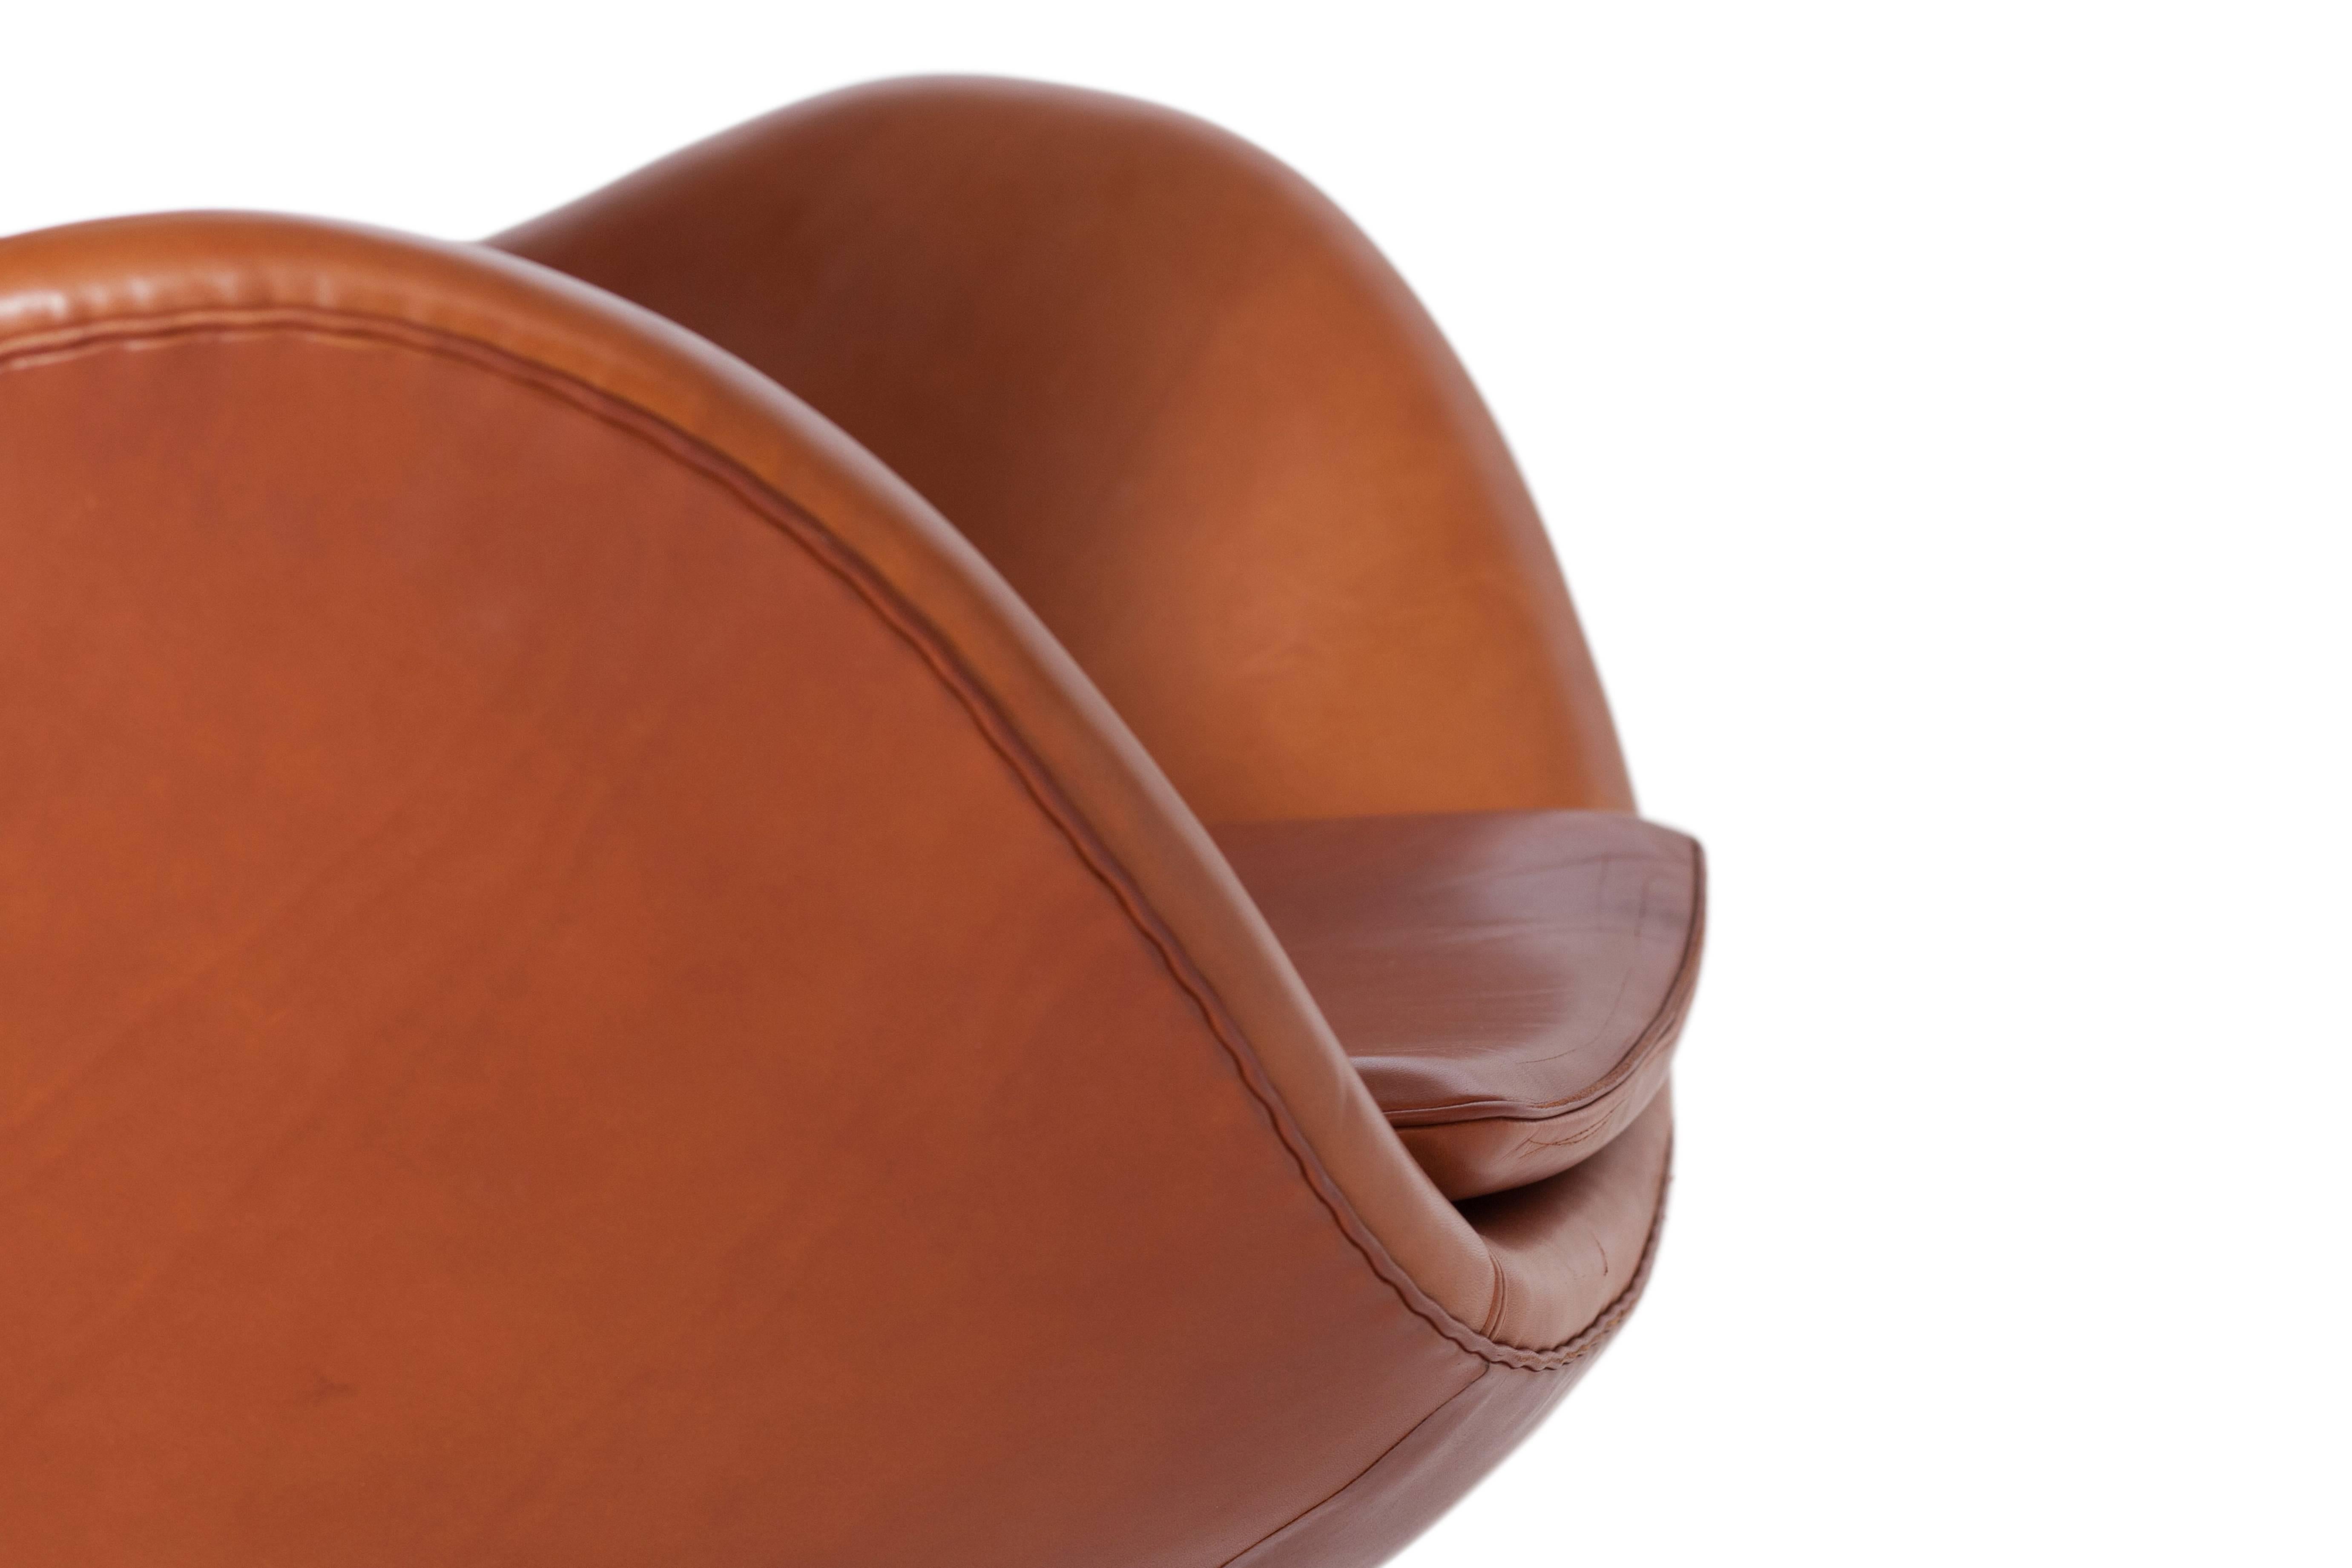 Danish Egg Chair in Cognac Leather by Arne Jacobsen